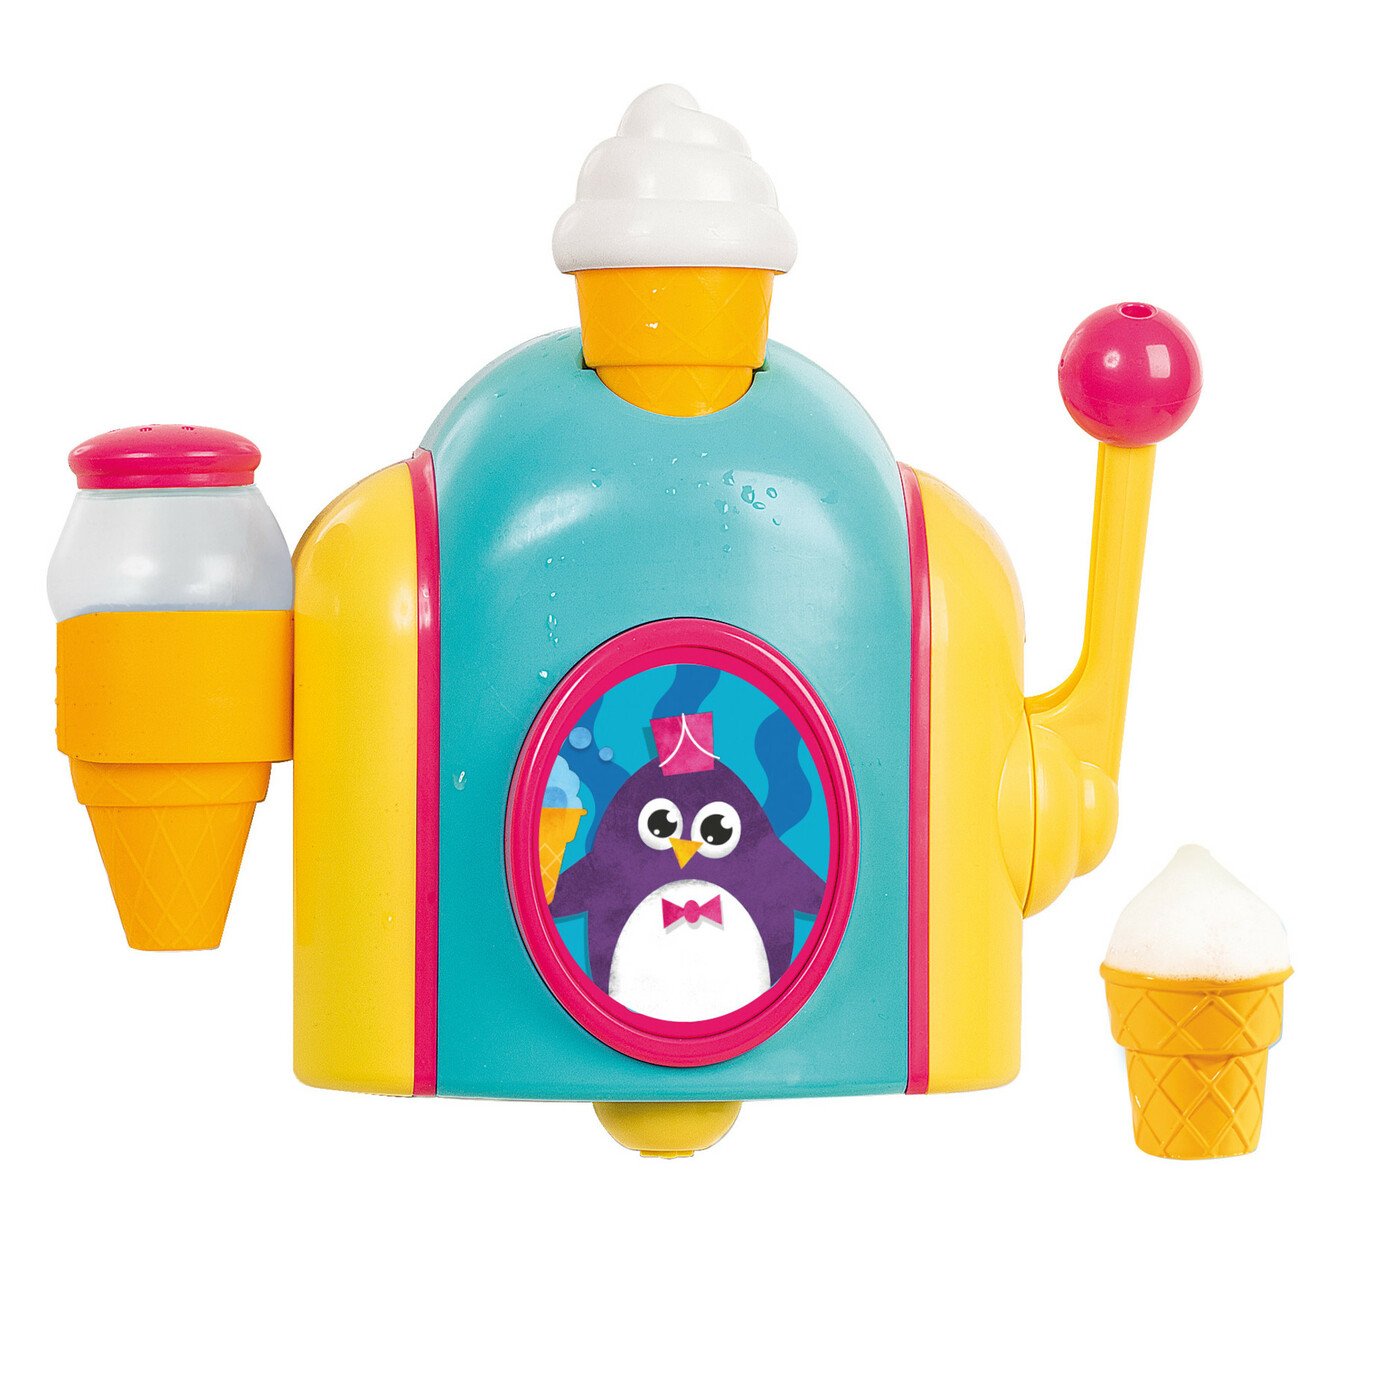 Tomy Foam Cone Factory Activity Toy